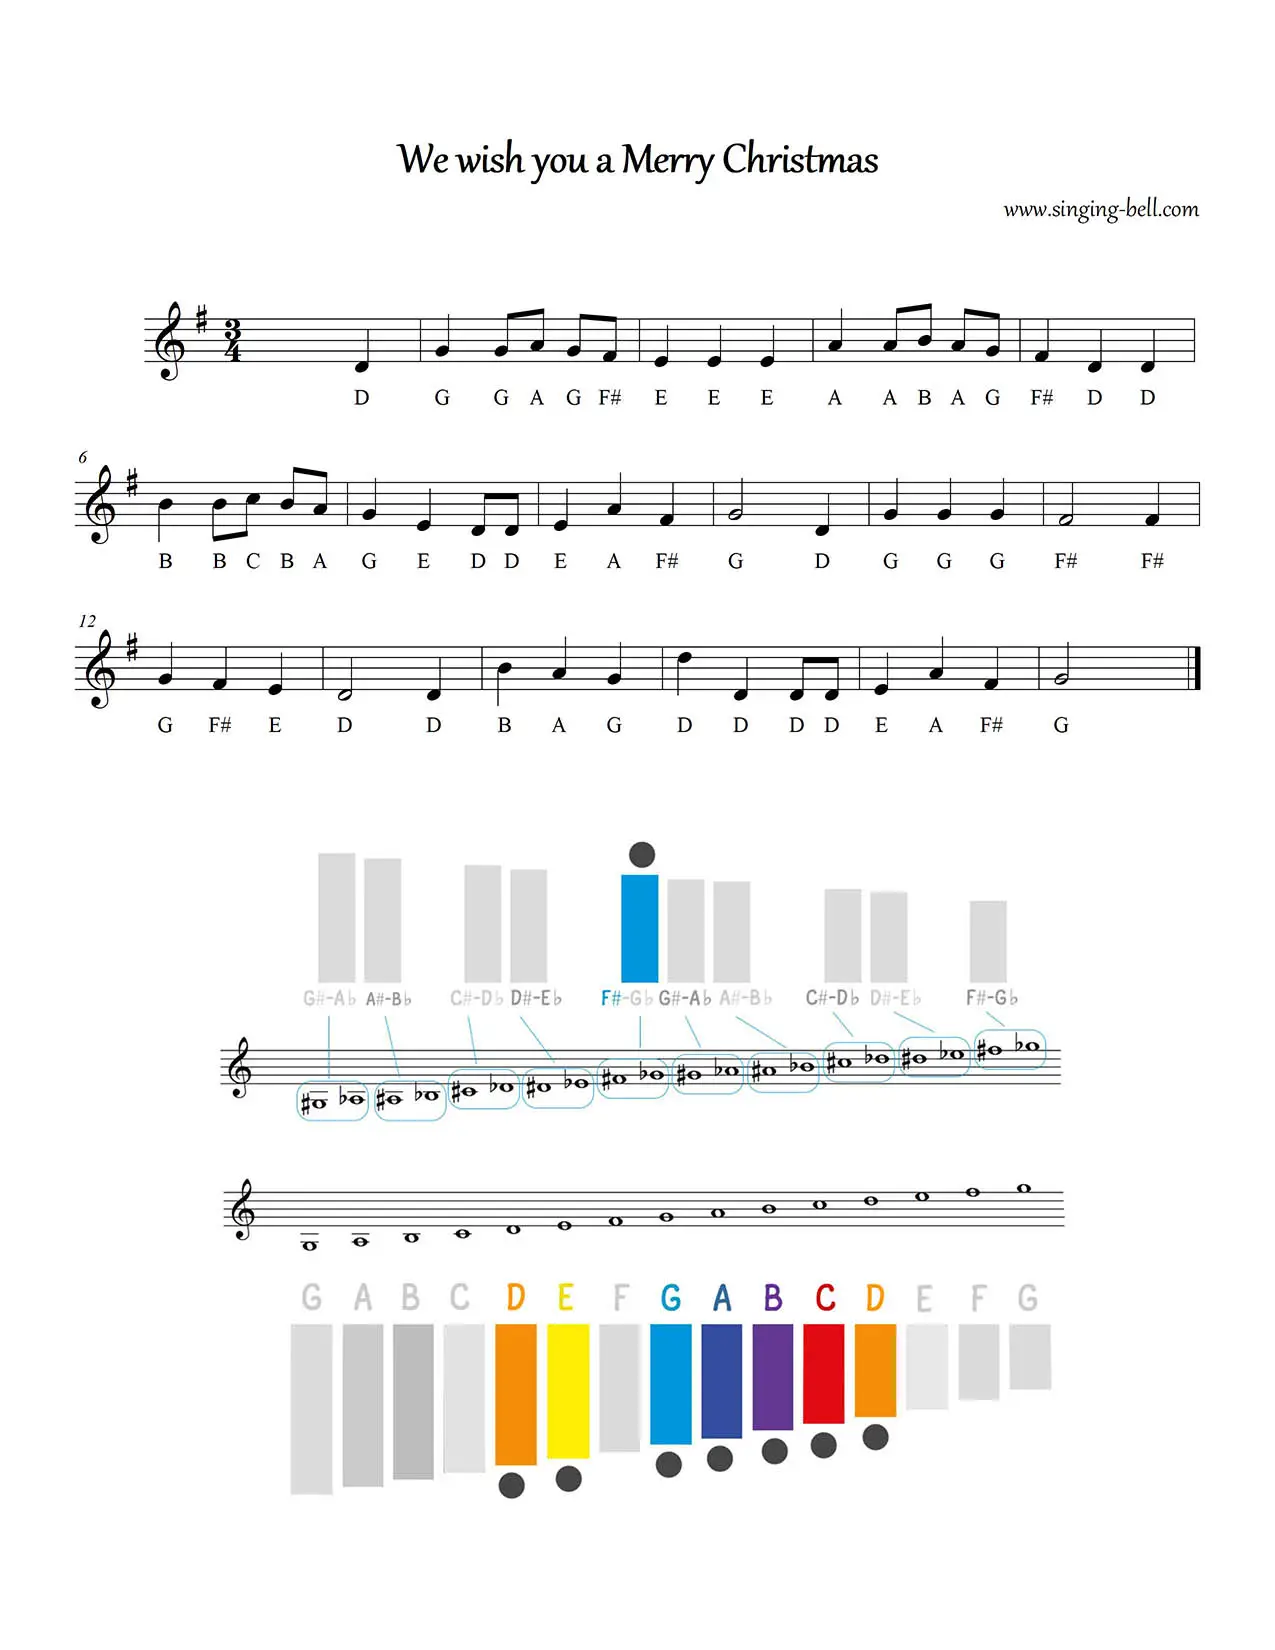 We wish you a merry Christmas free xylophone glockenspiel sheet music notes chart pdf